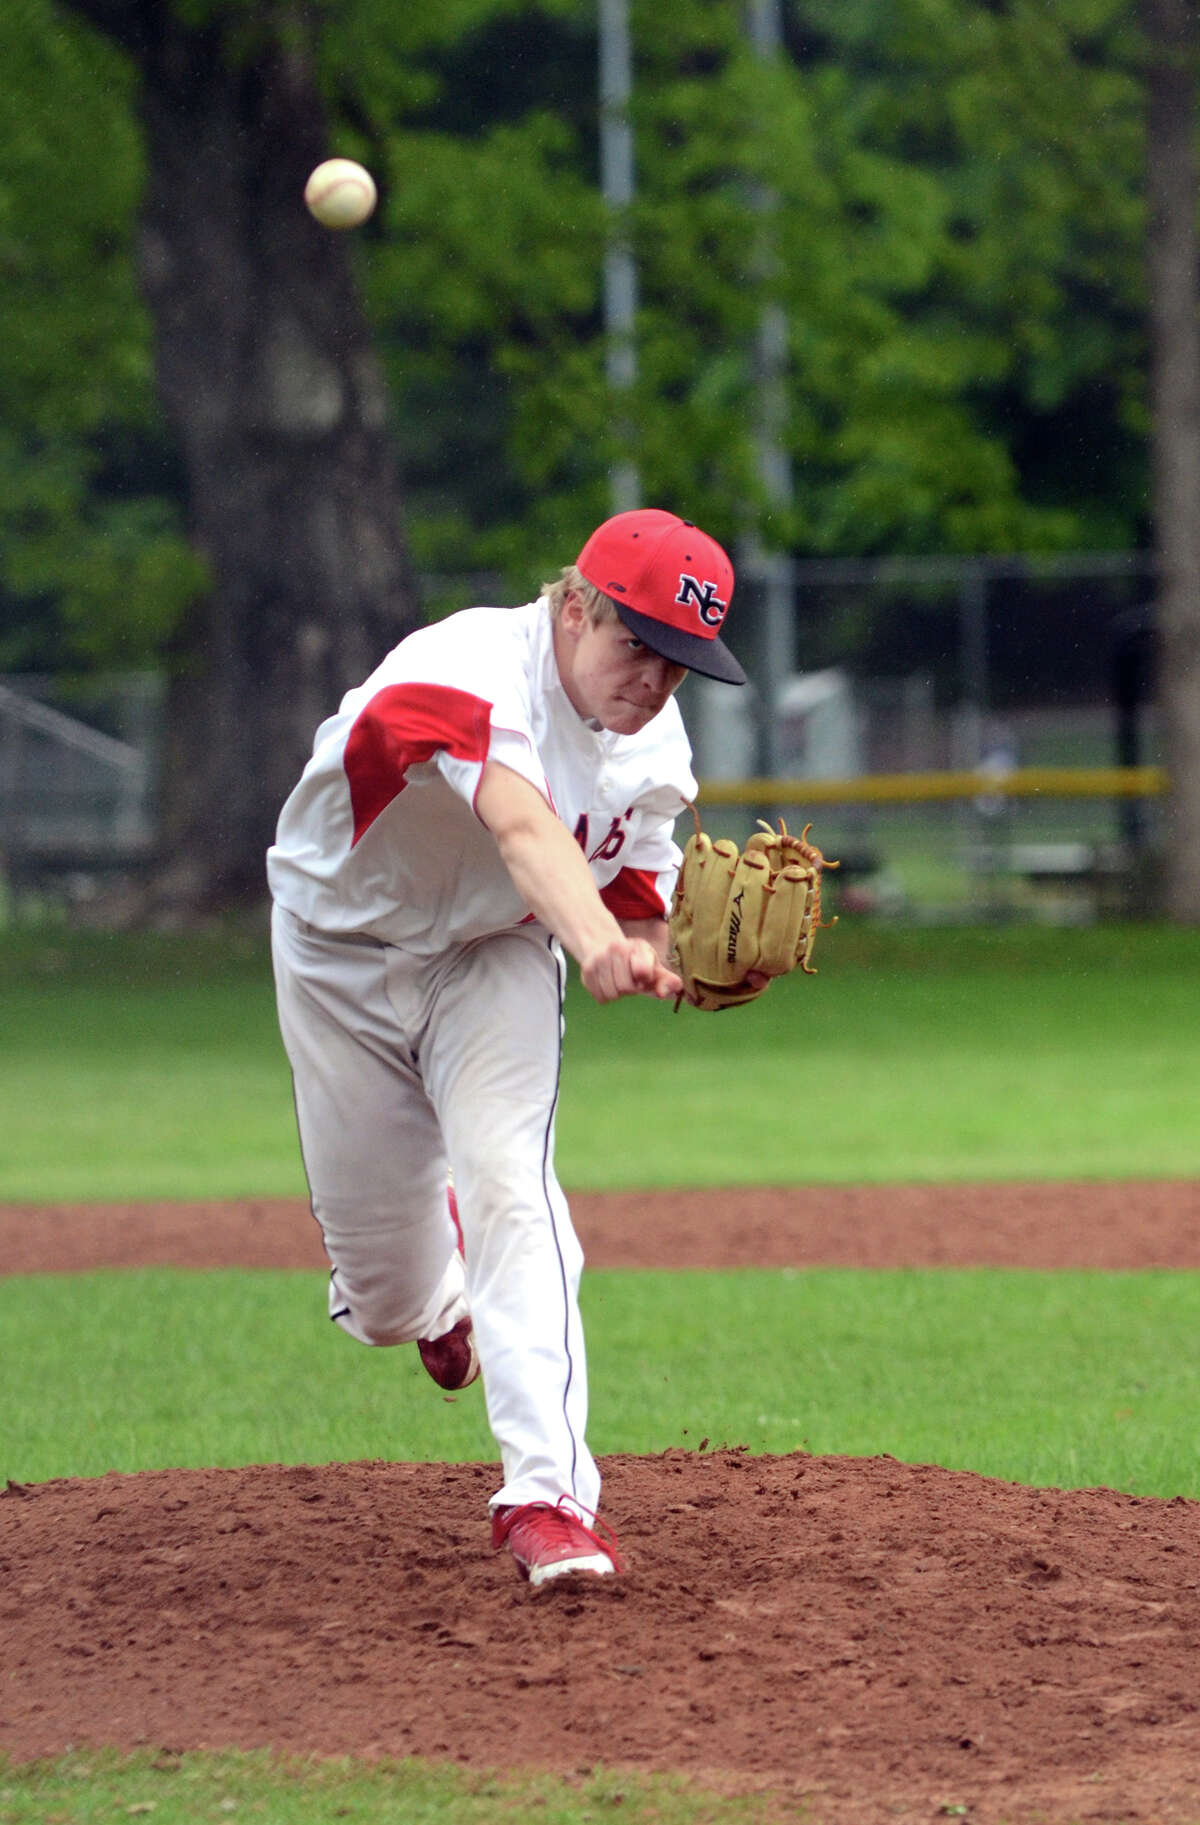 New Canaan's Jackson Anderson (22) pitches during the baseball game against Danbury High School at Mead Park in New Canaan on Monday, May 14, 2012.